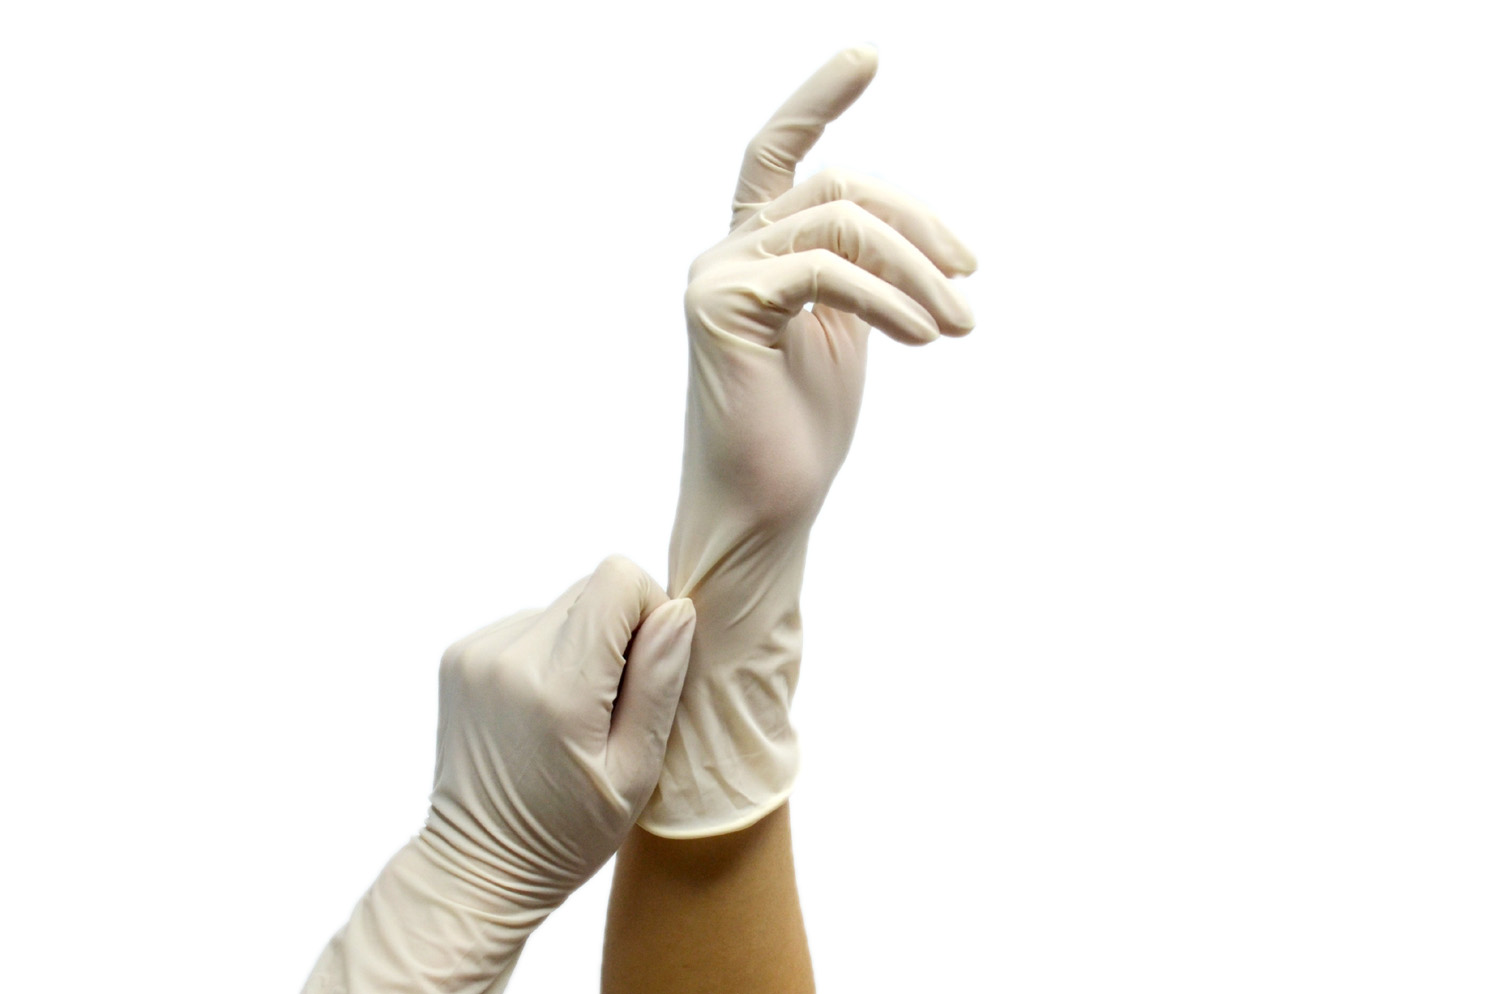 How to Select Surgical Glove for Latex Allergies